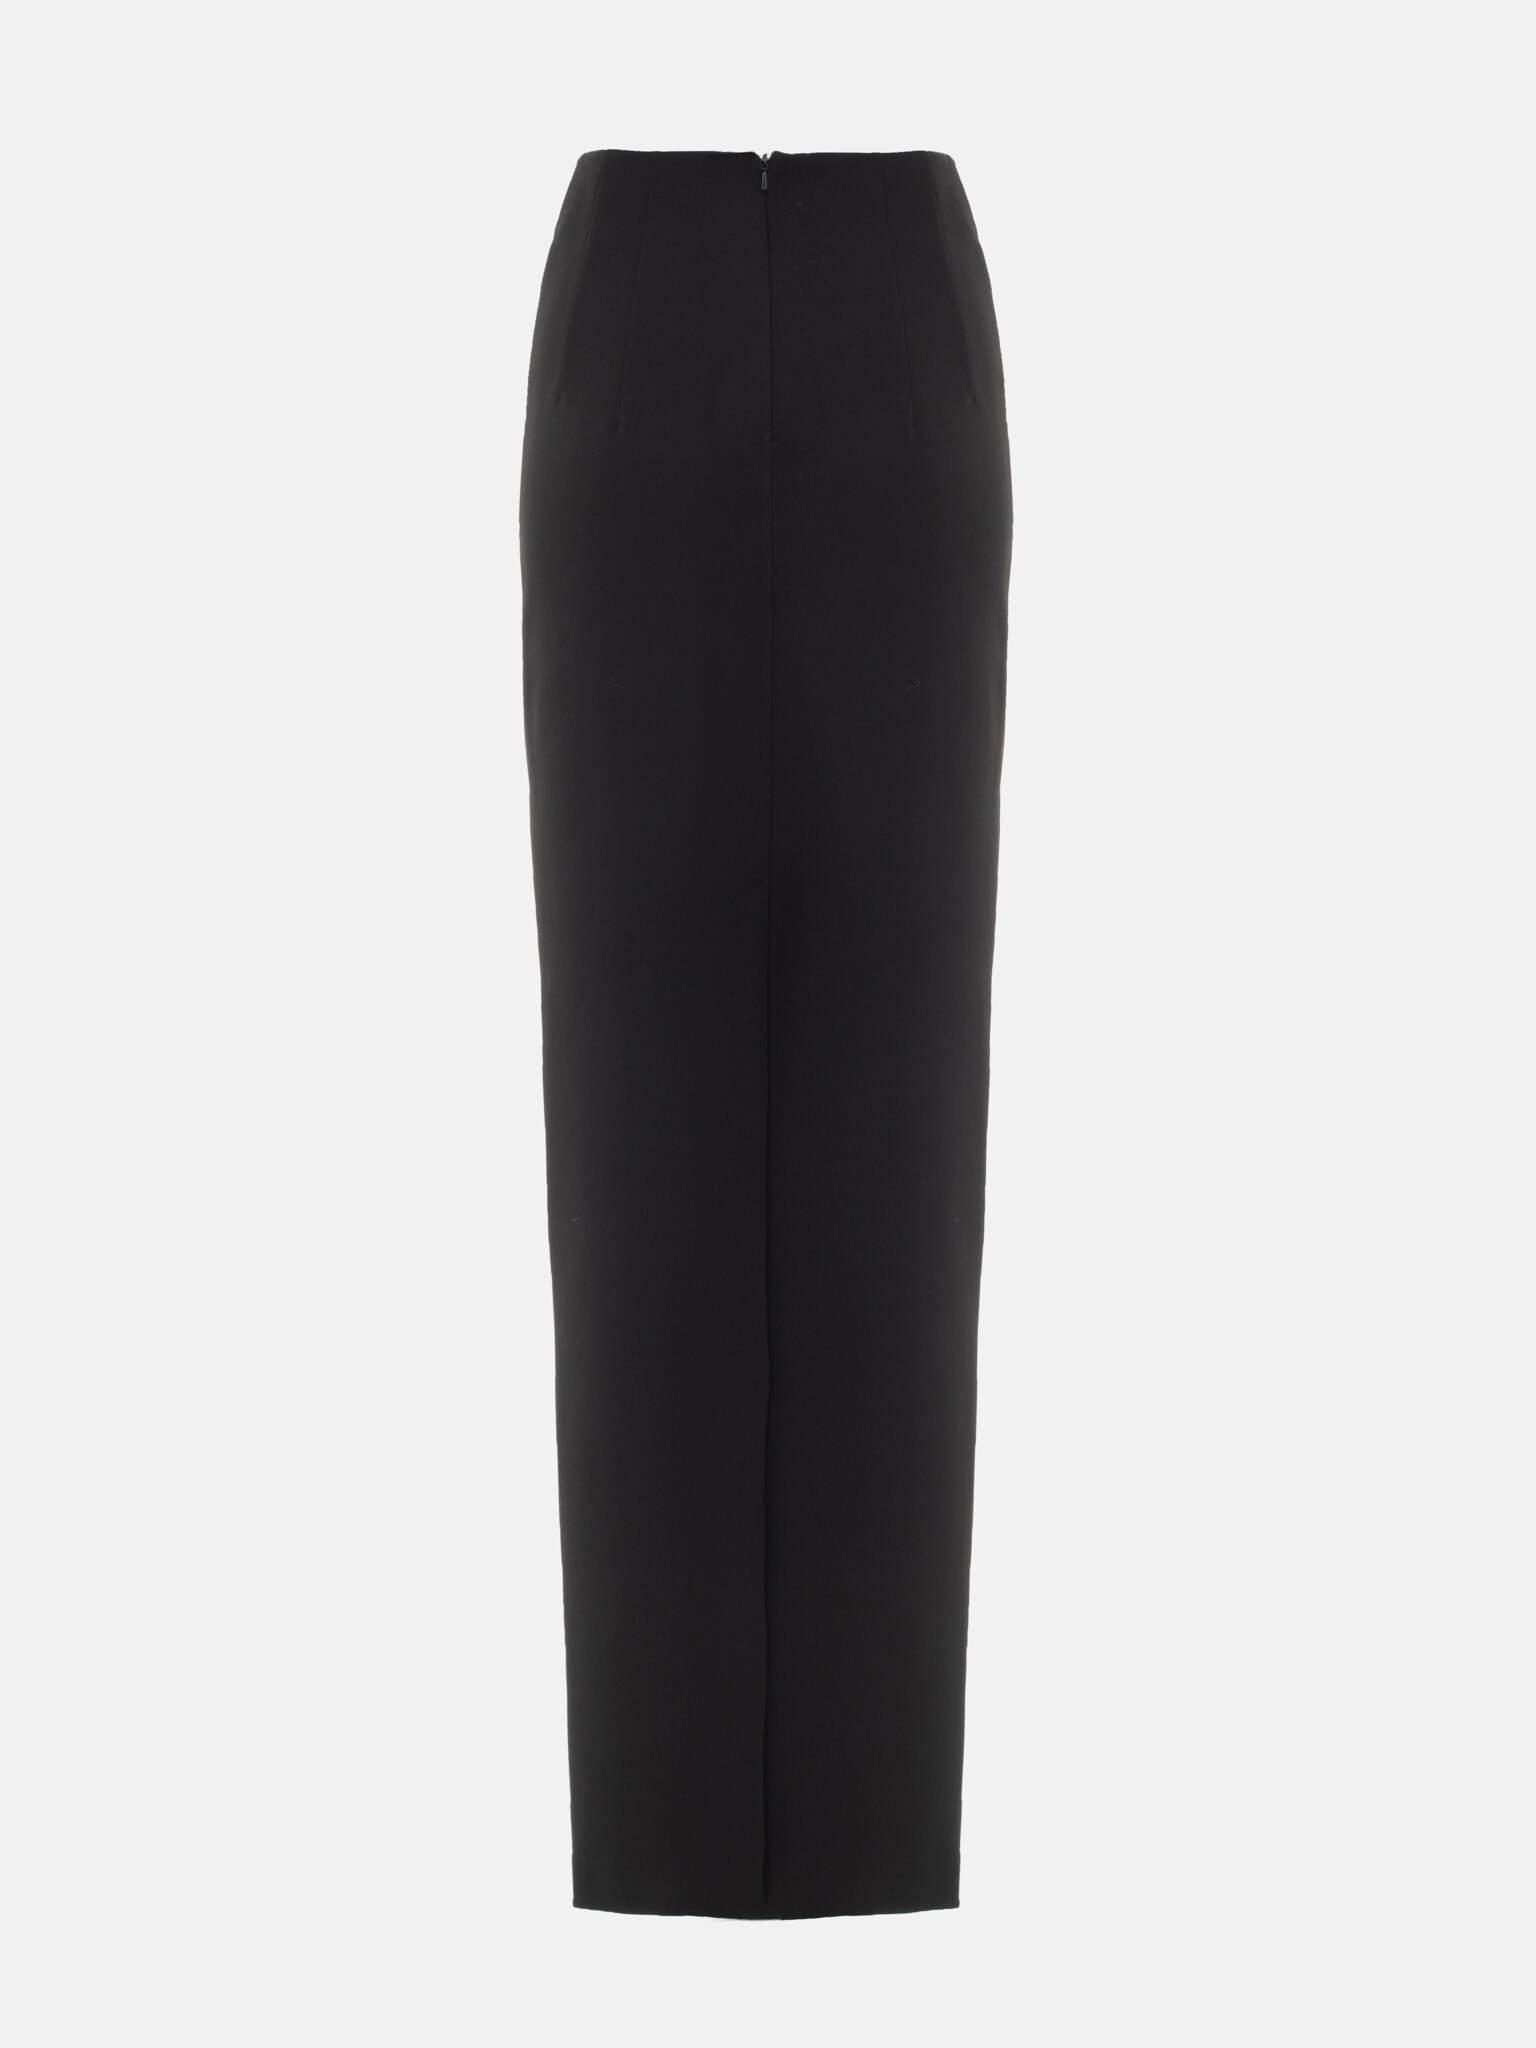 Pencil skirt in maxi length :: LICHI - Online fashion store